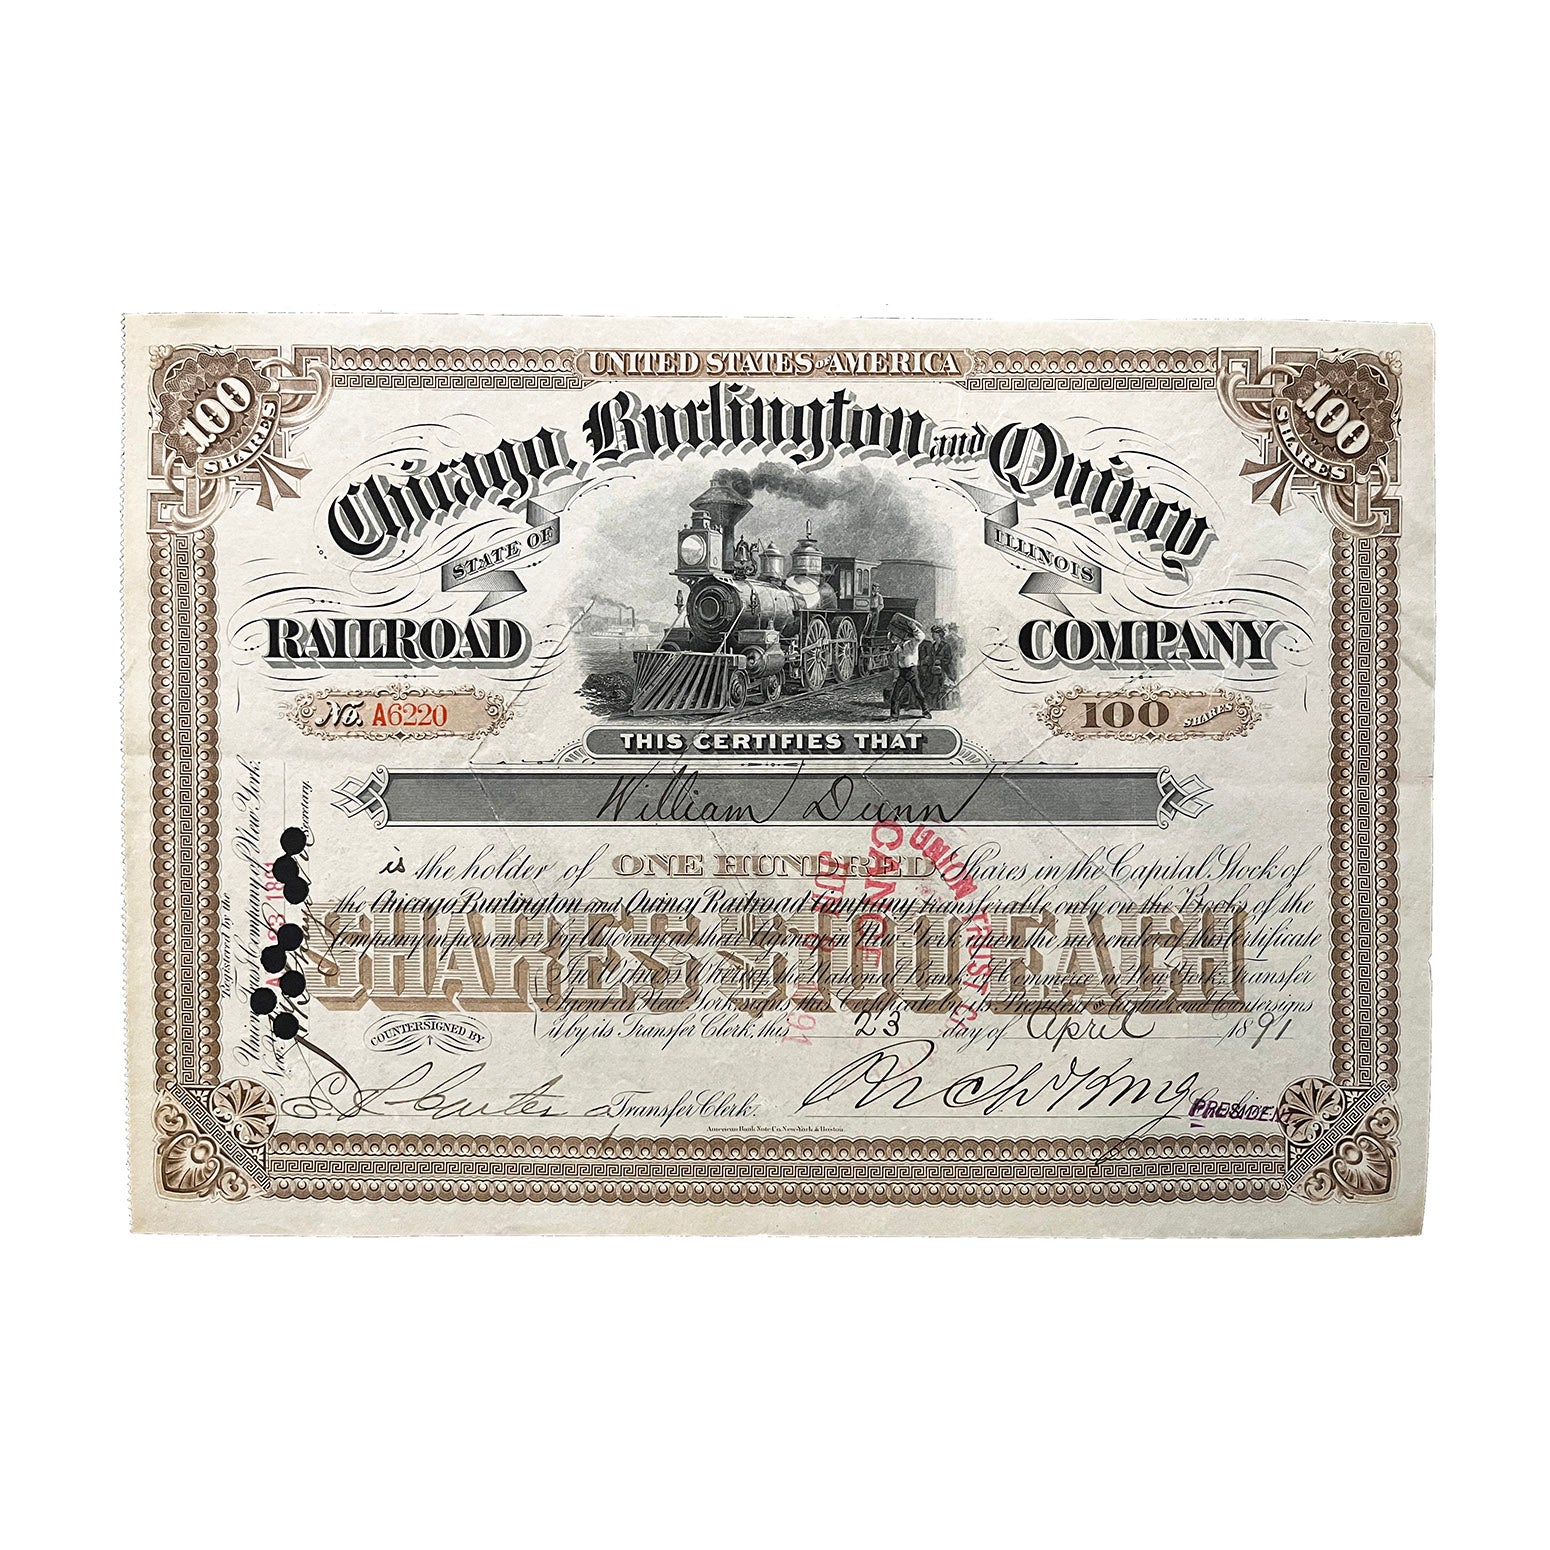 Original railway share certificate, Chicago, Burlington and Quincy Railroad Company, 100 shares at $100 each, issued 1891.